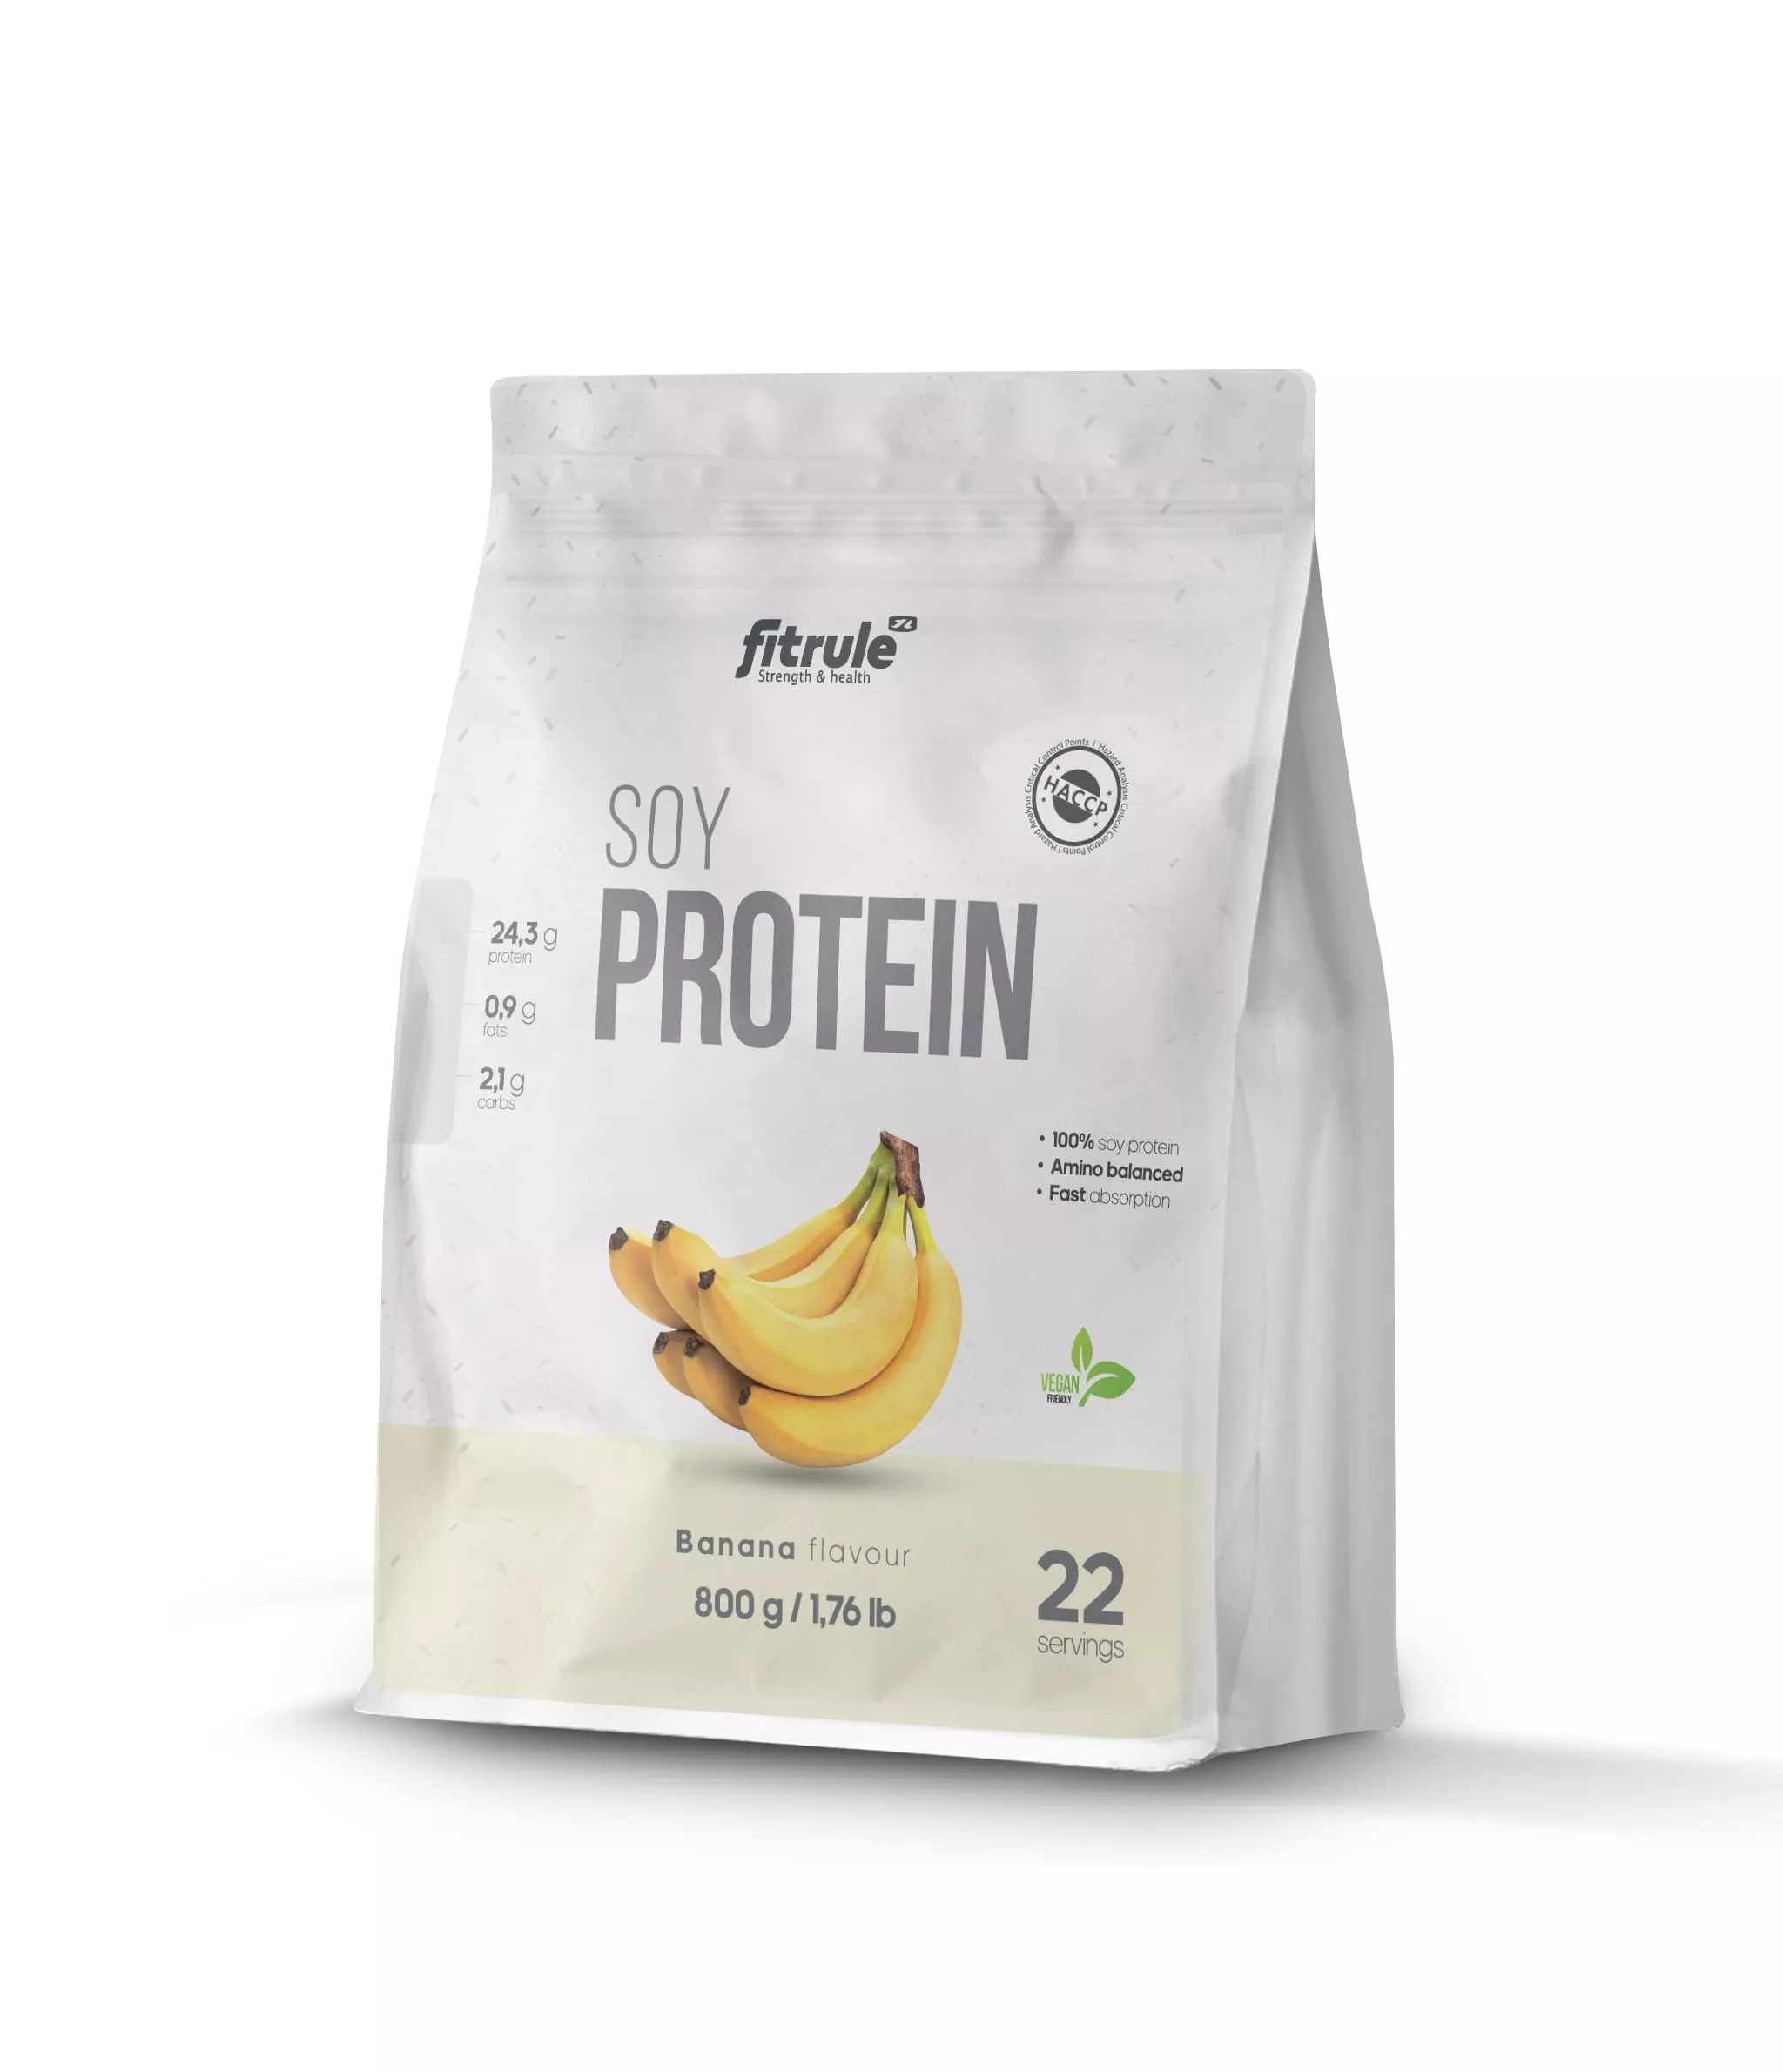 Fitrule Soy Protein 800g (Квадропак) фото